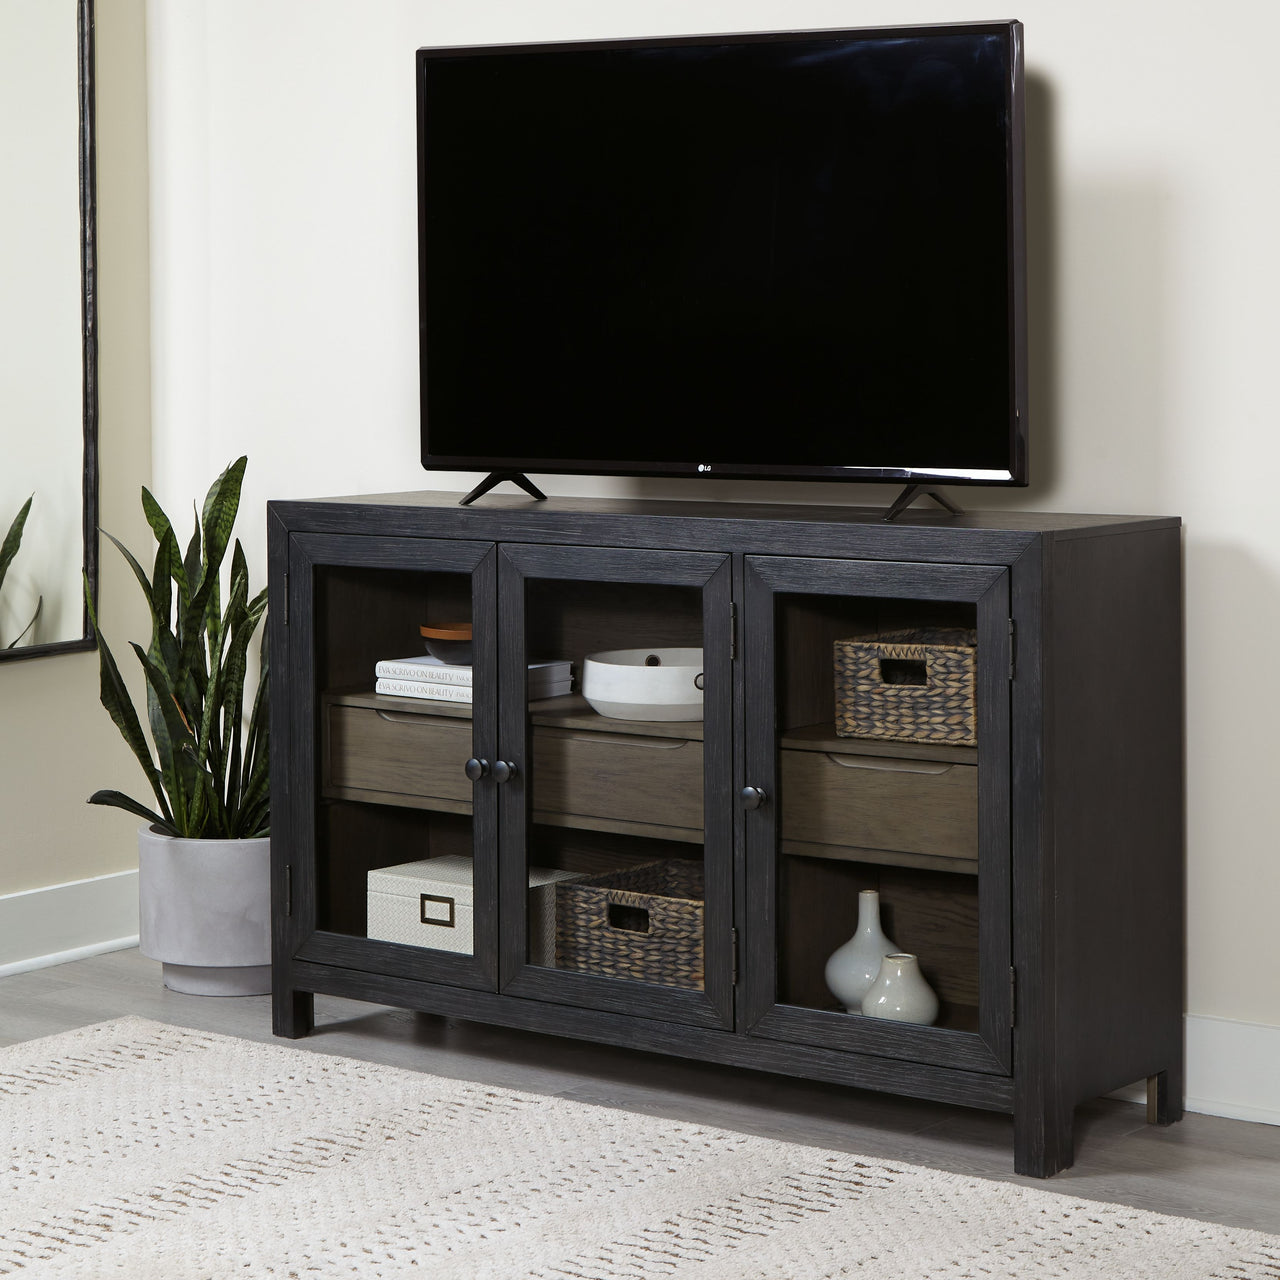 Lenston - Accent Cabinet - Tony's Home Furnishings